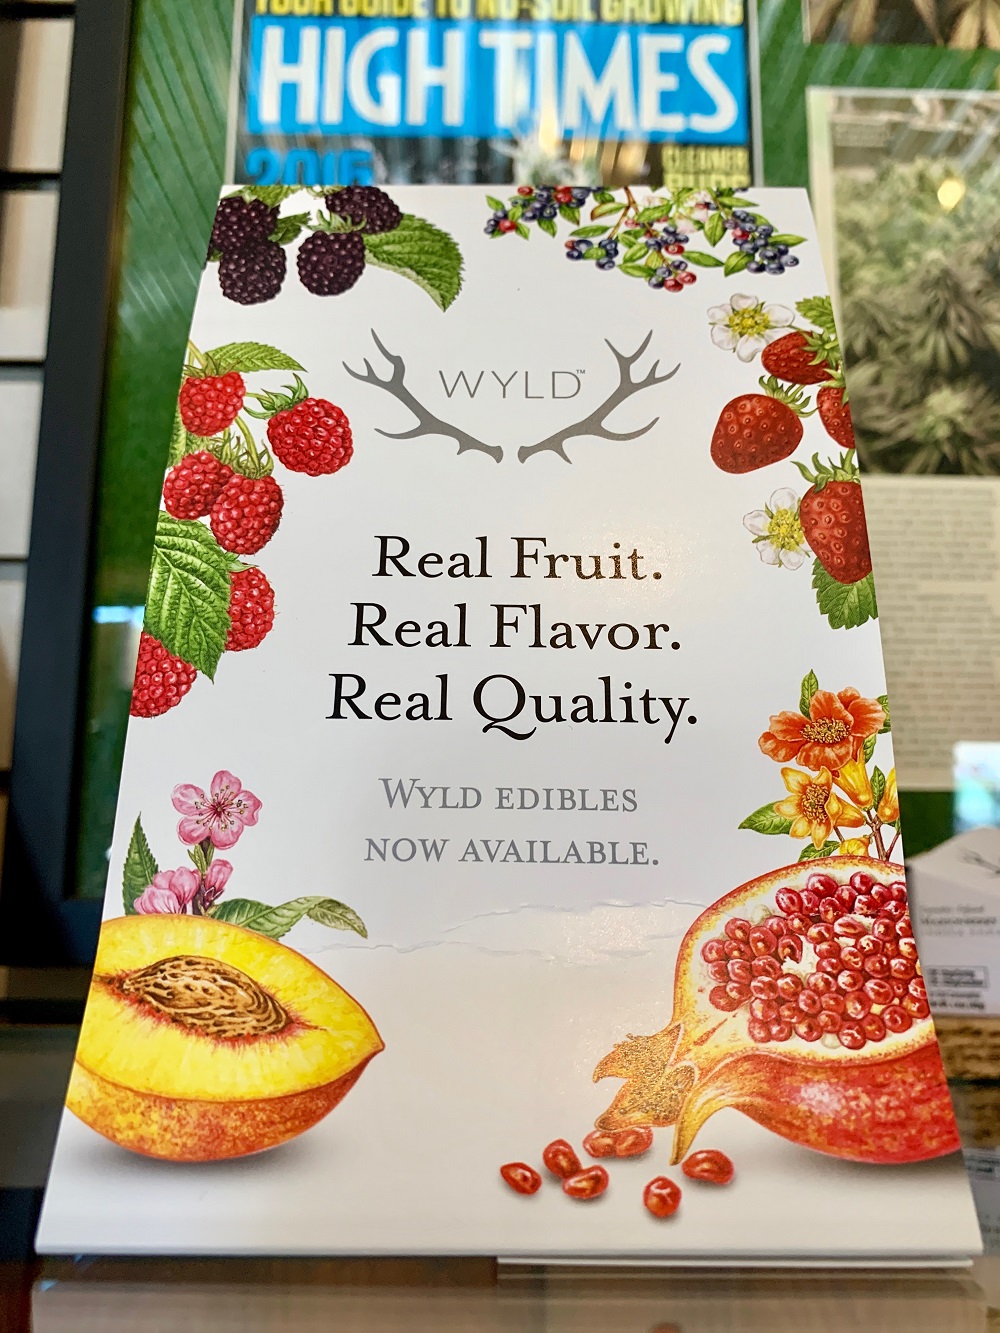 WYLD hemp-derived edibles from HCH Alma in the store